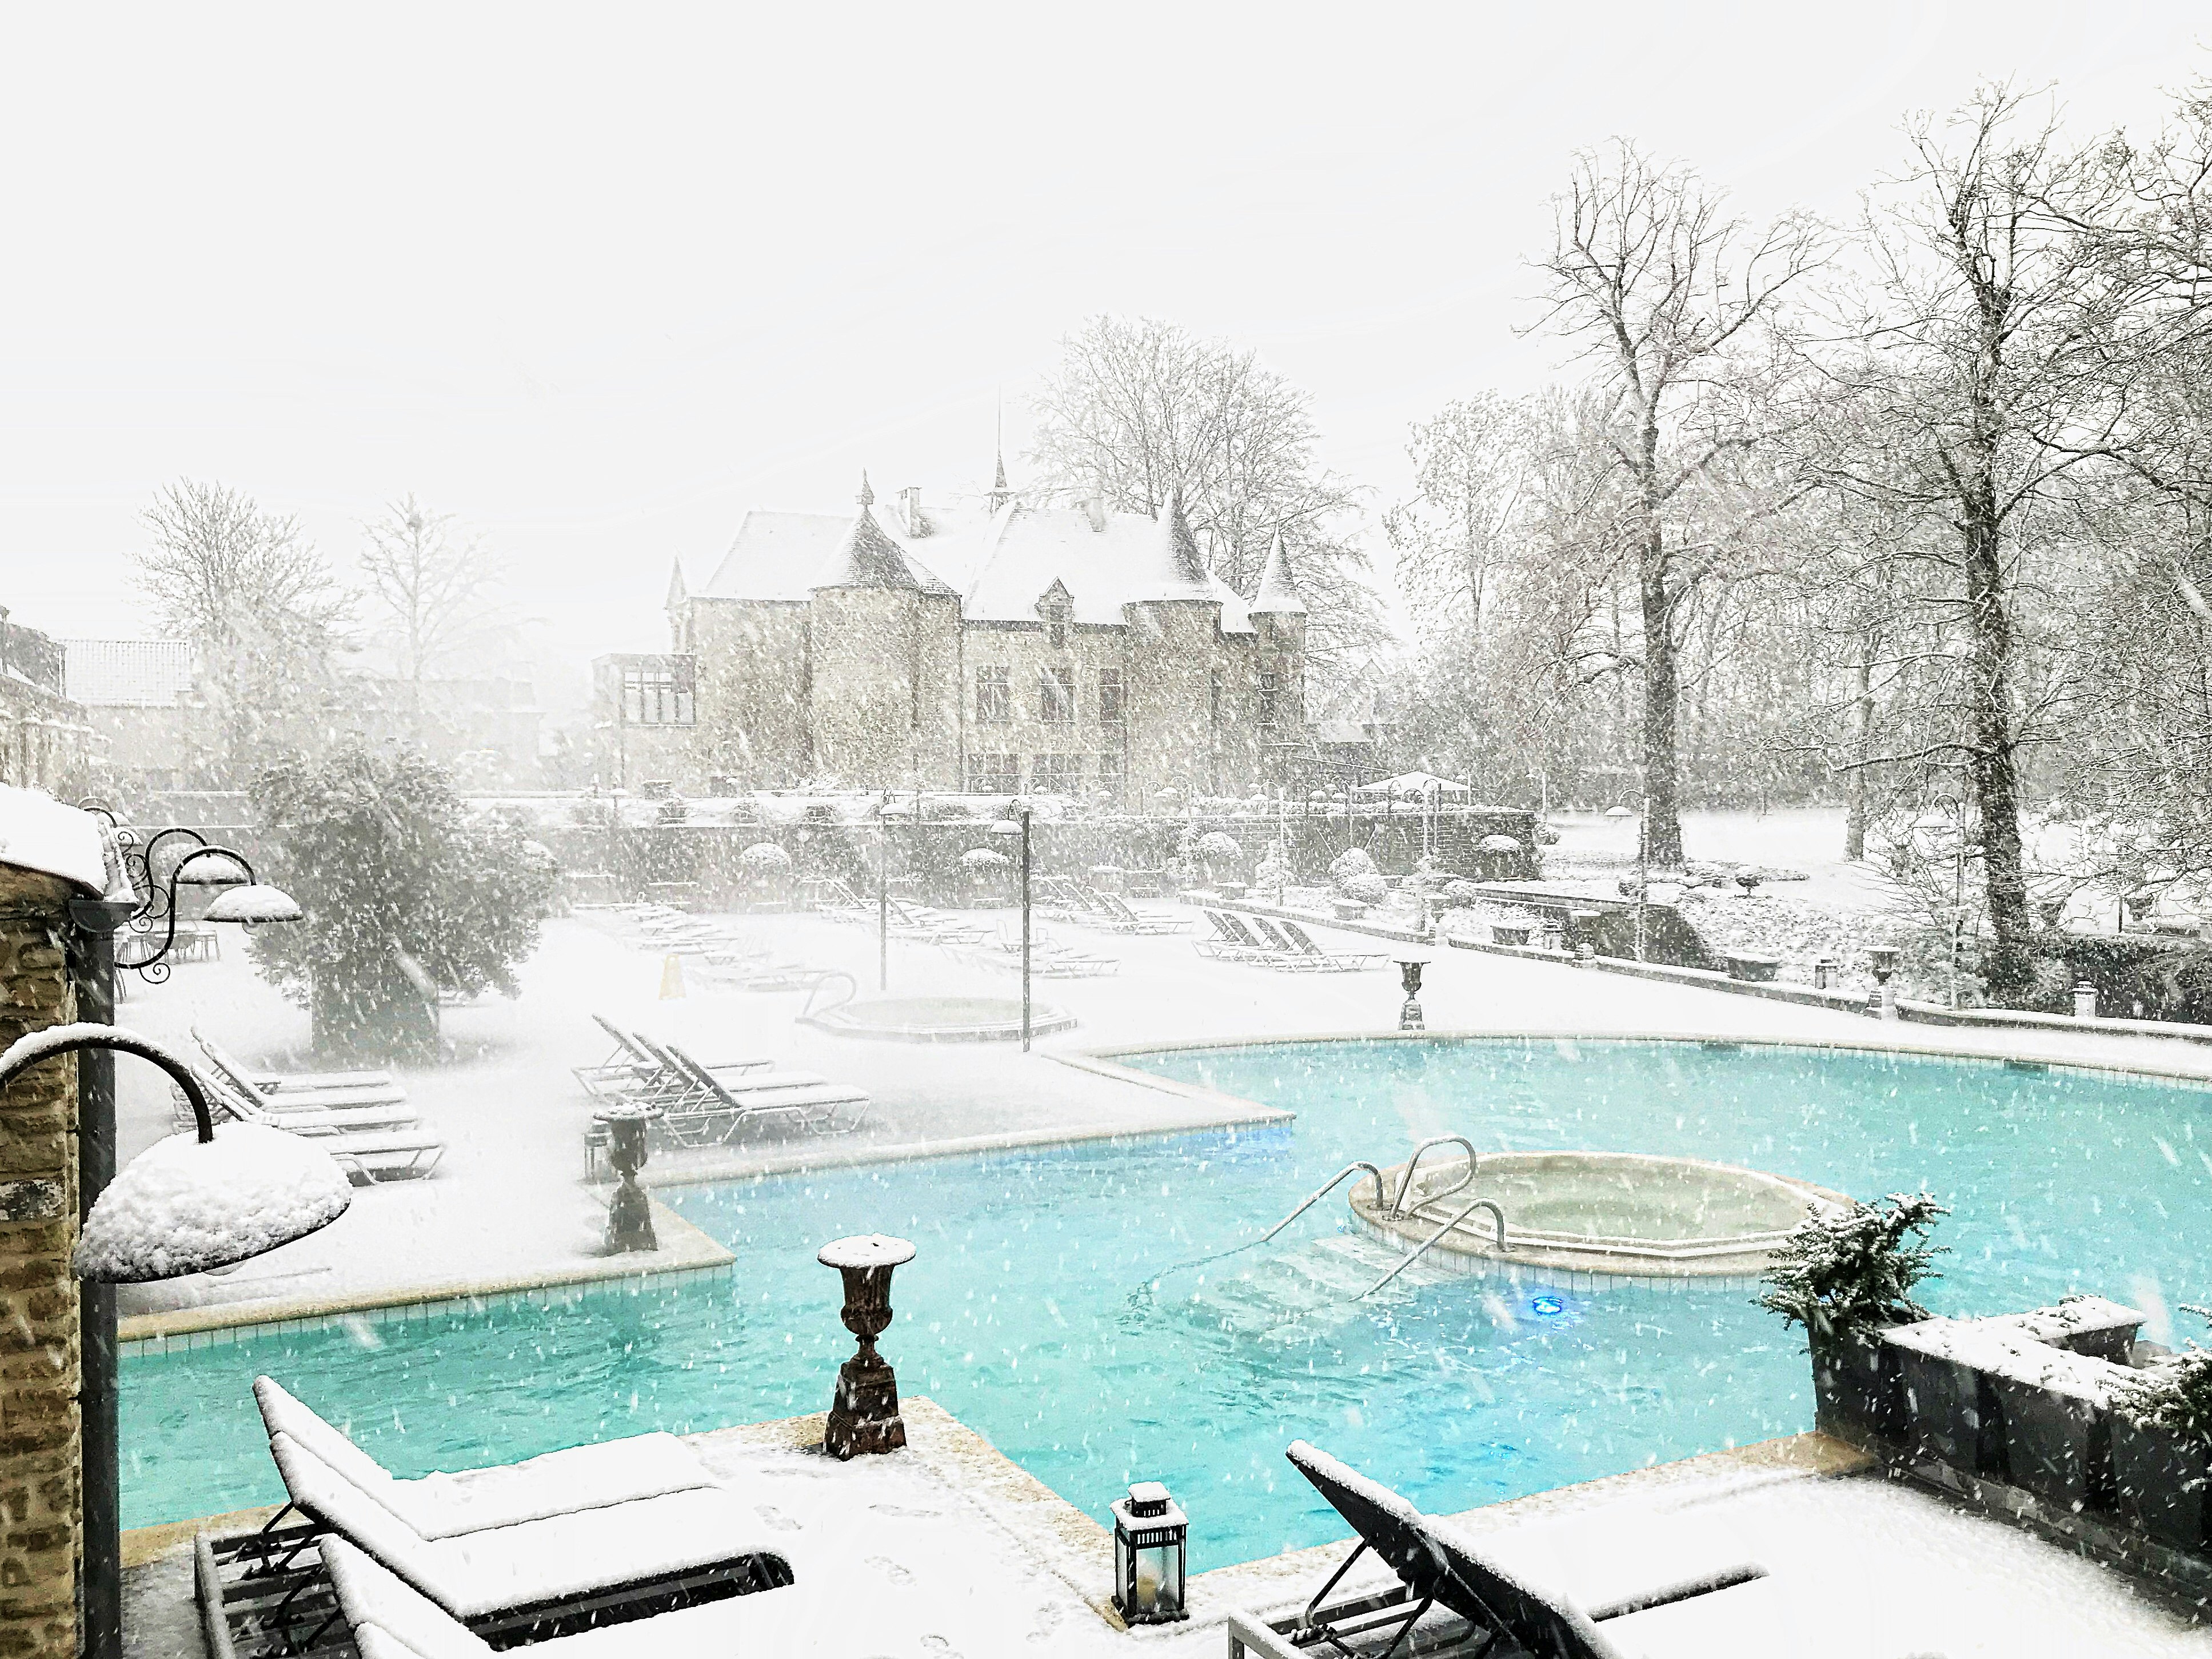 A bright blue pool with a round hot tub in the center is surrounded by snow, with a classic Belgian chalet in the background, its roof and turrets slightly obscured by fresh falling snow